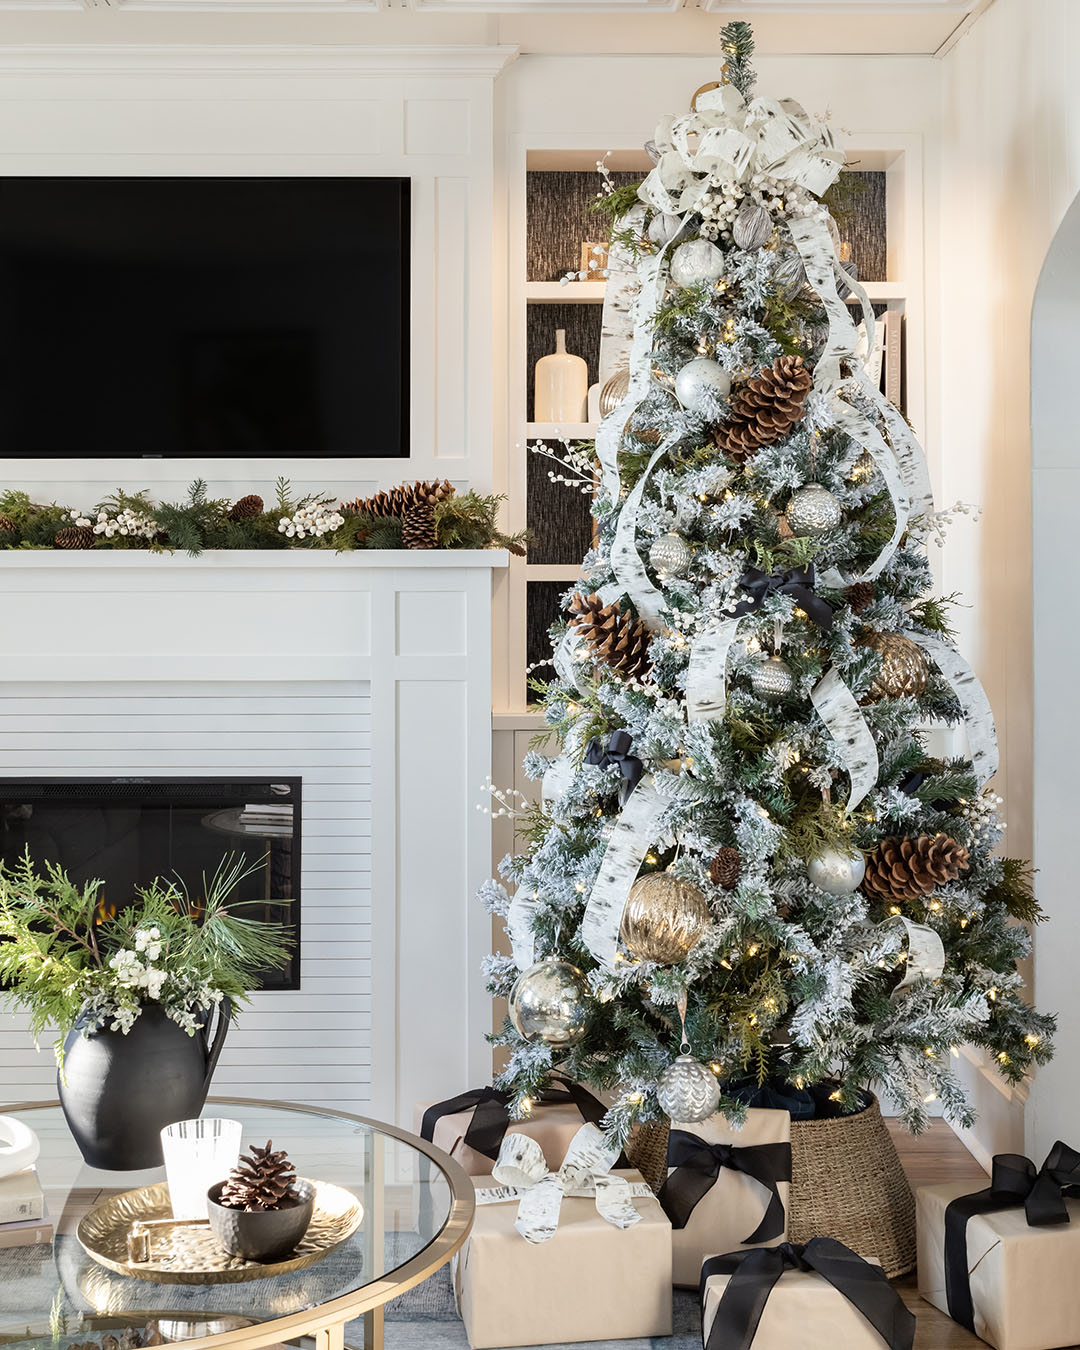 Black and White Christmas Decor in Our Living Room - The Creek Line House